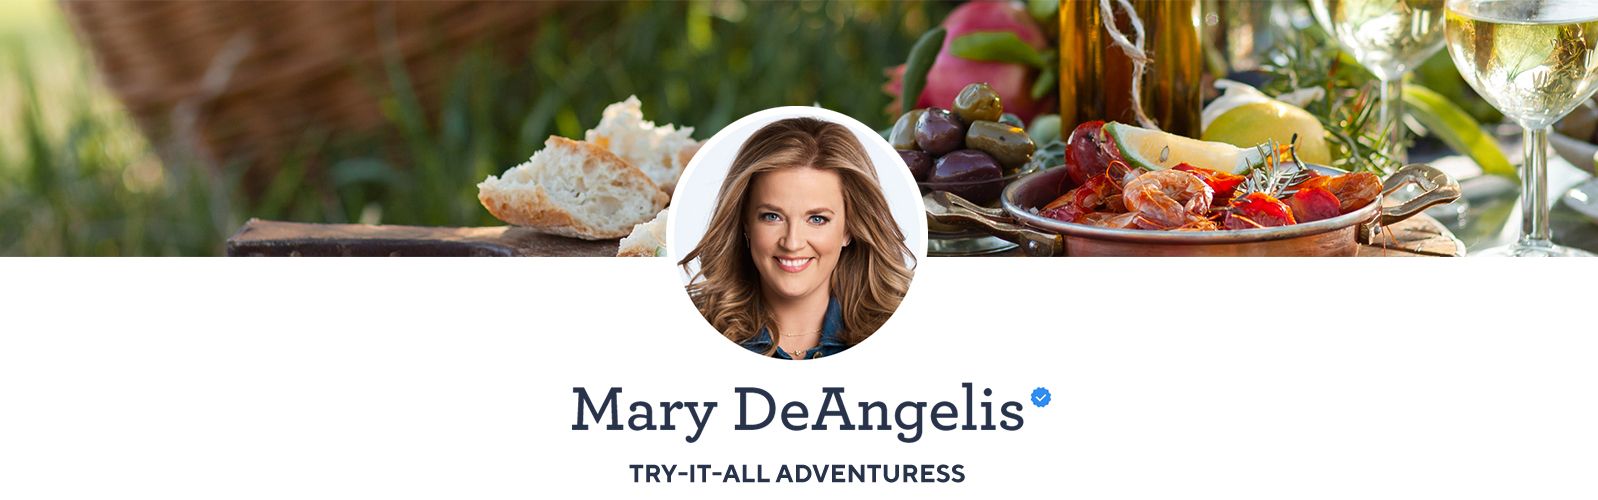 Mary DeAngelis - Try-It-All Adventuress